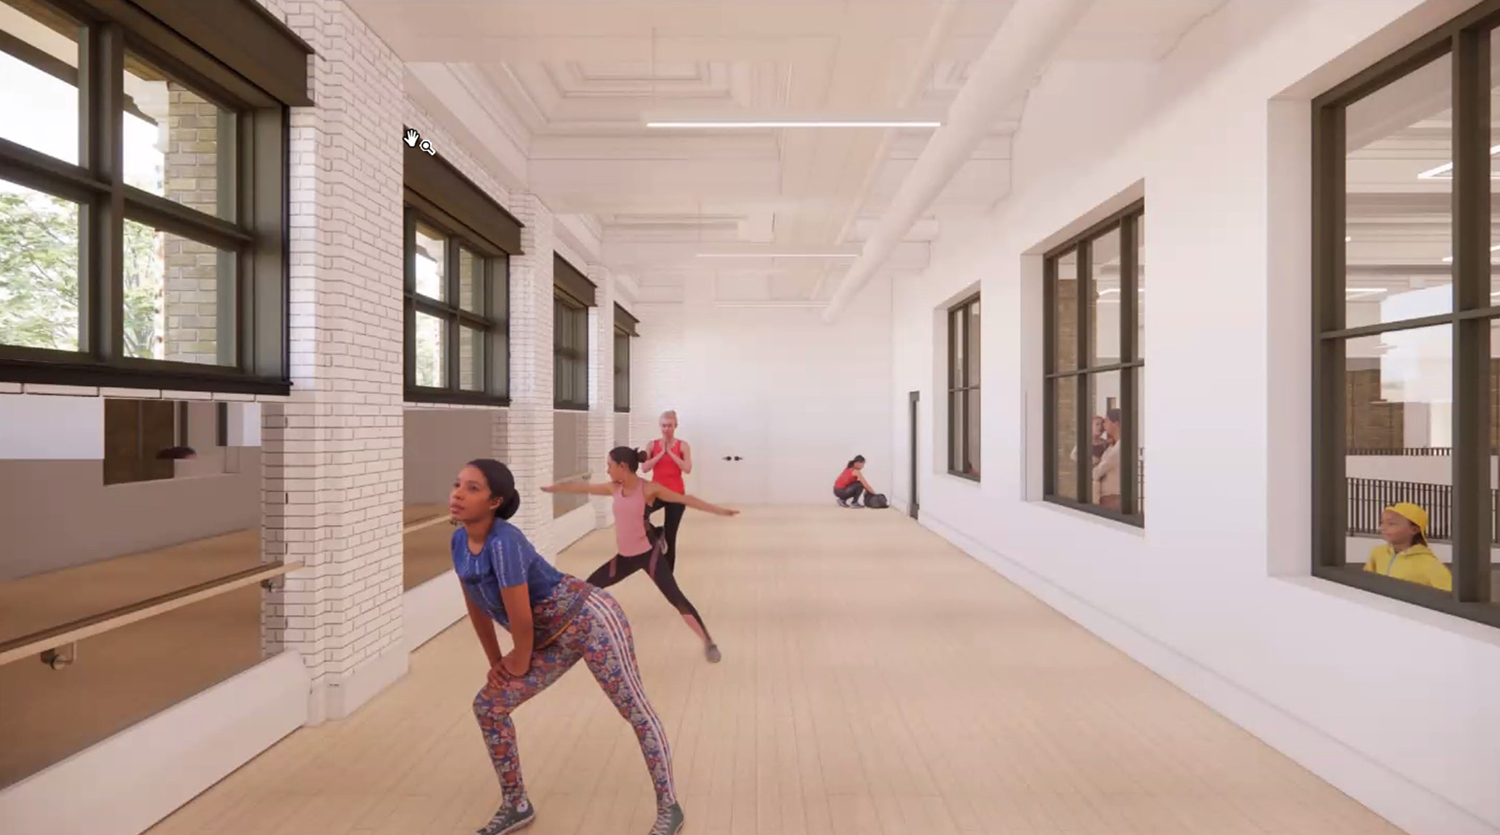 Dance Room at Clarendon Community Center. Rendering by Booth Hansen